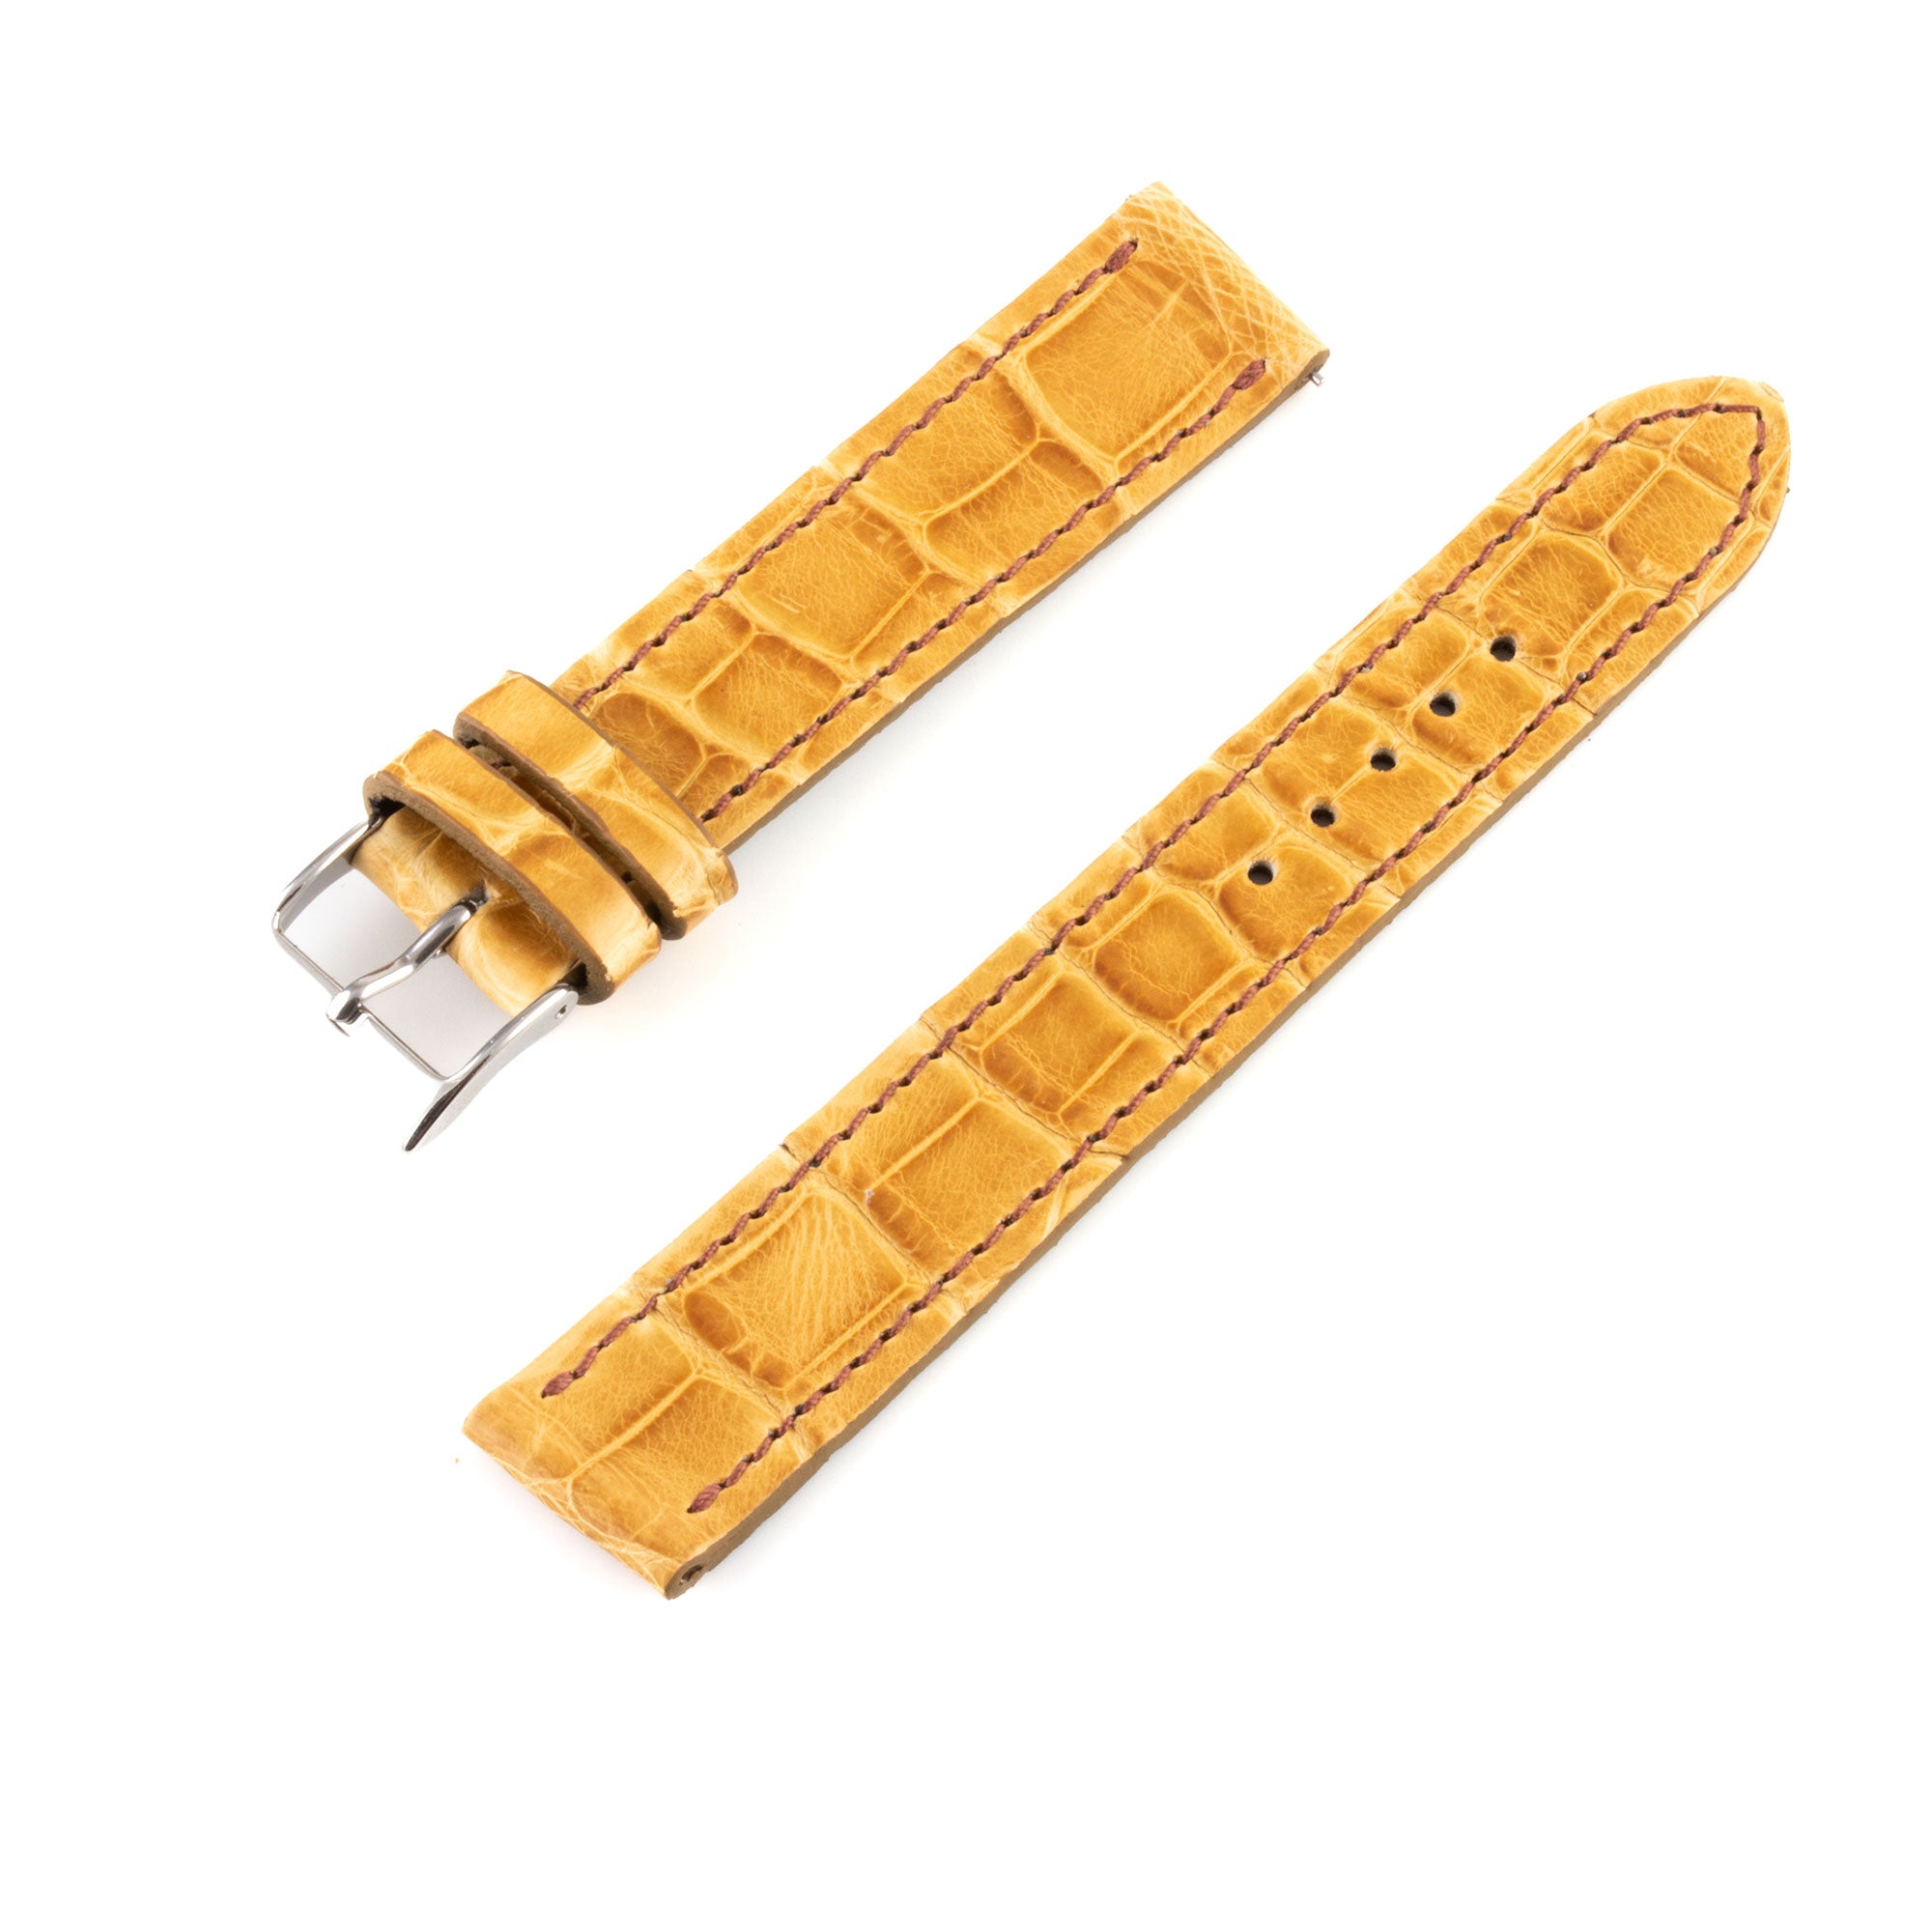 Alligator "Solo" leather watch band - 17mm width (0.67 inches) / Size M (n° 9)